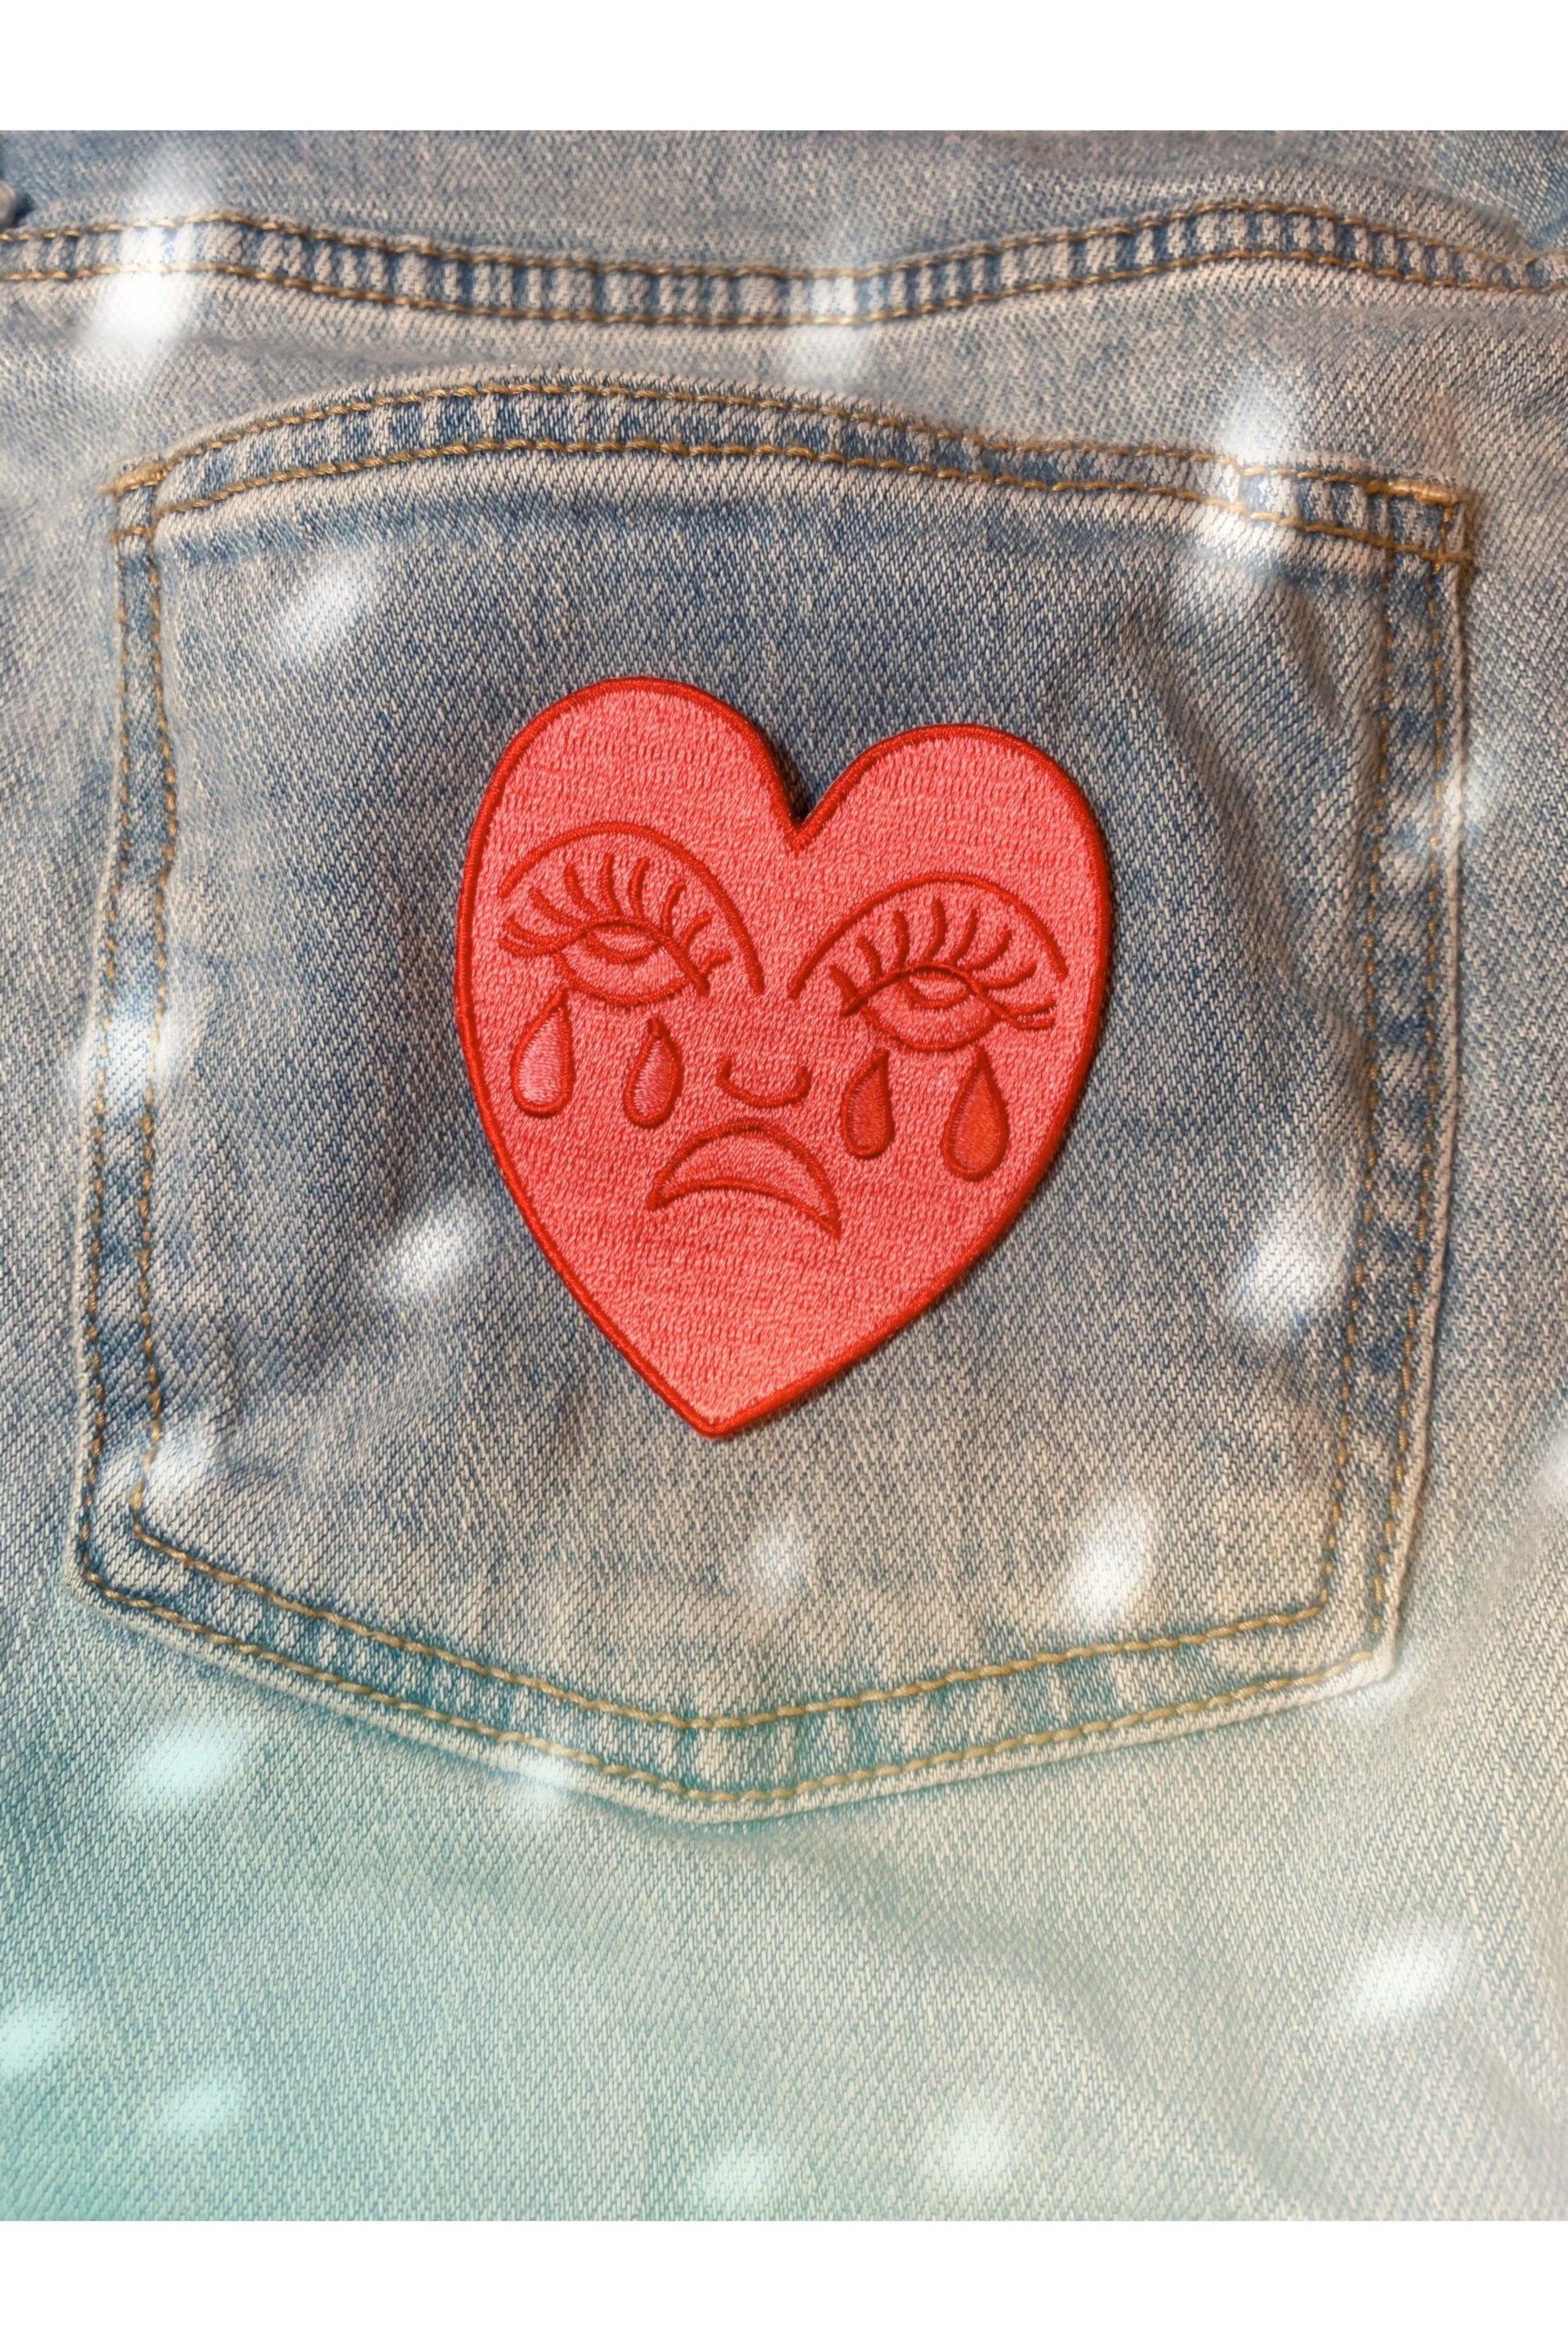 Crying Heart Patch